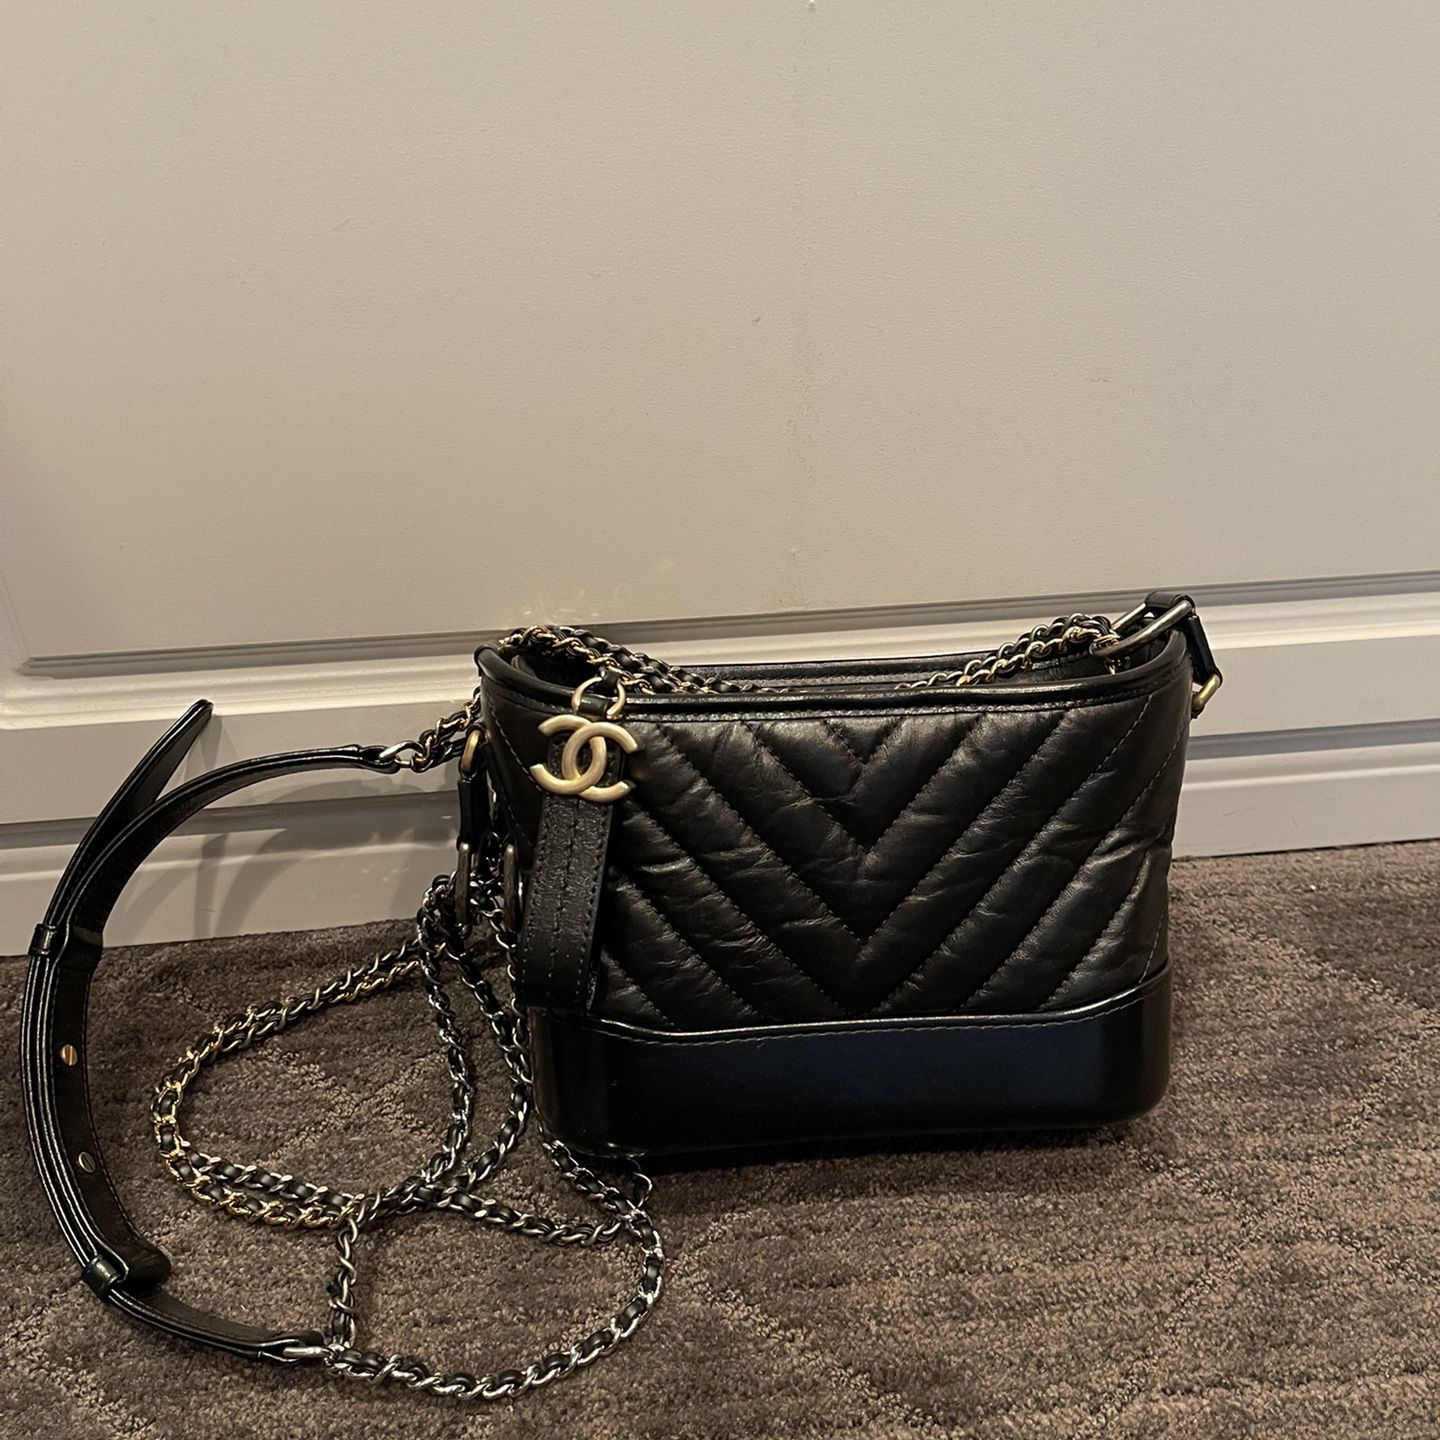 Chanel Gabrielle Bag - Small for Sale in Bergenfield, NJ - OfferUp